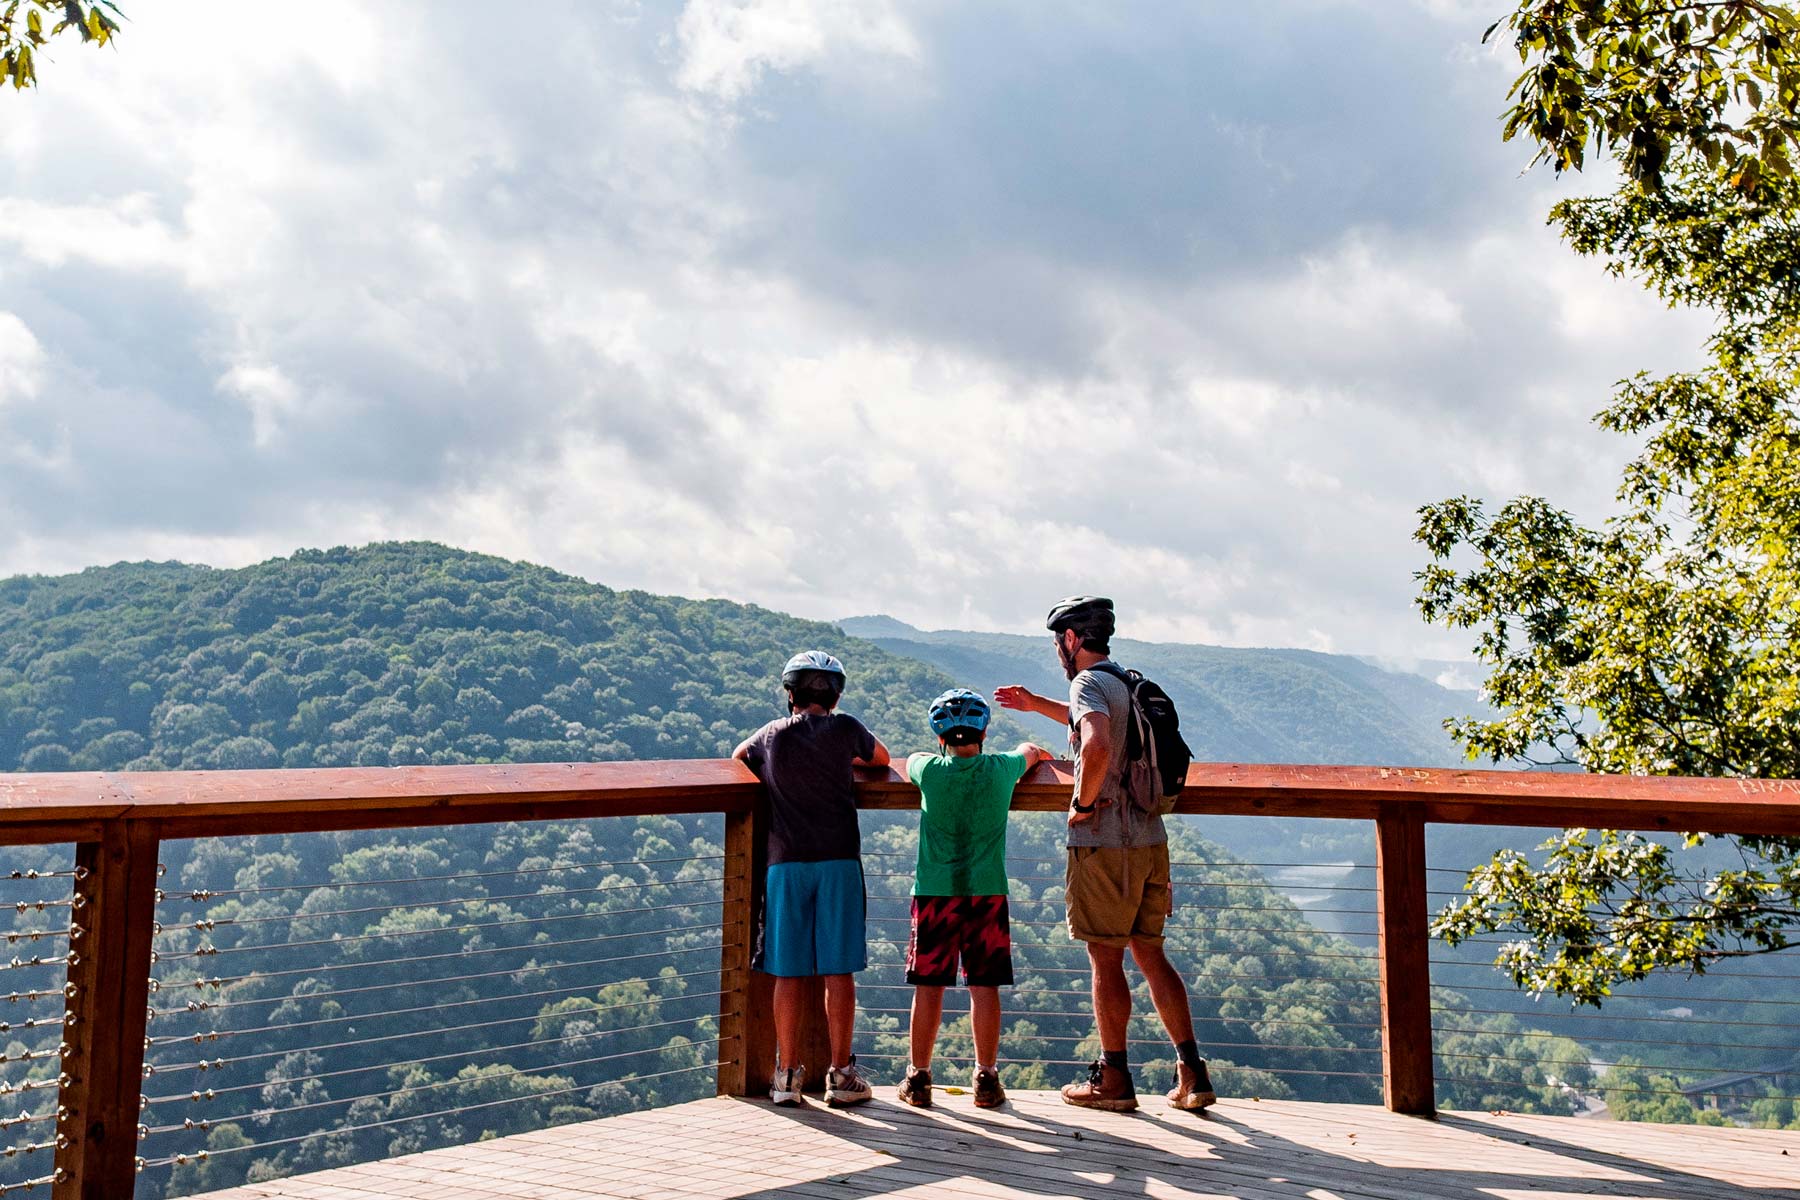 things to do new river gorge national park with kids, new river gorge national park west virginia, concho rim